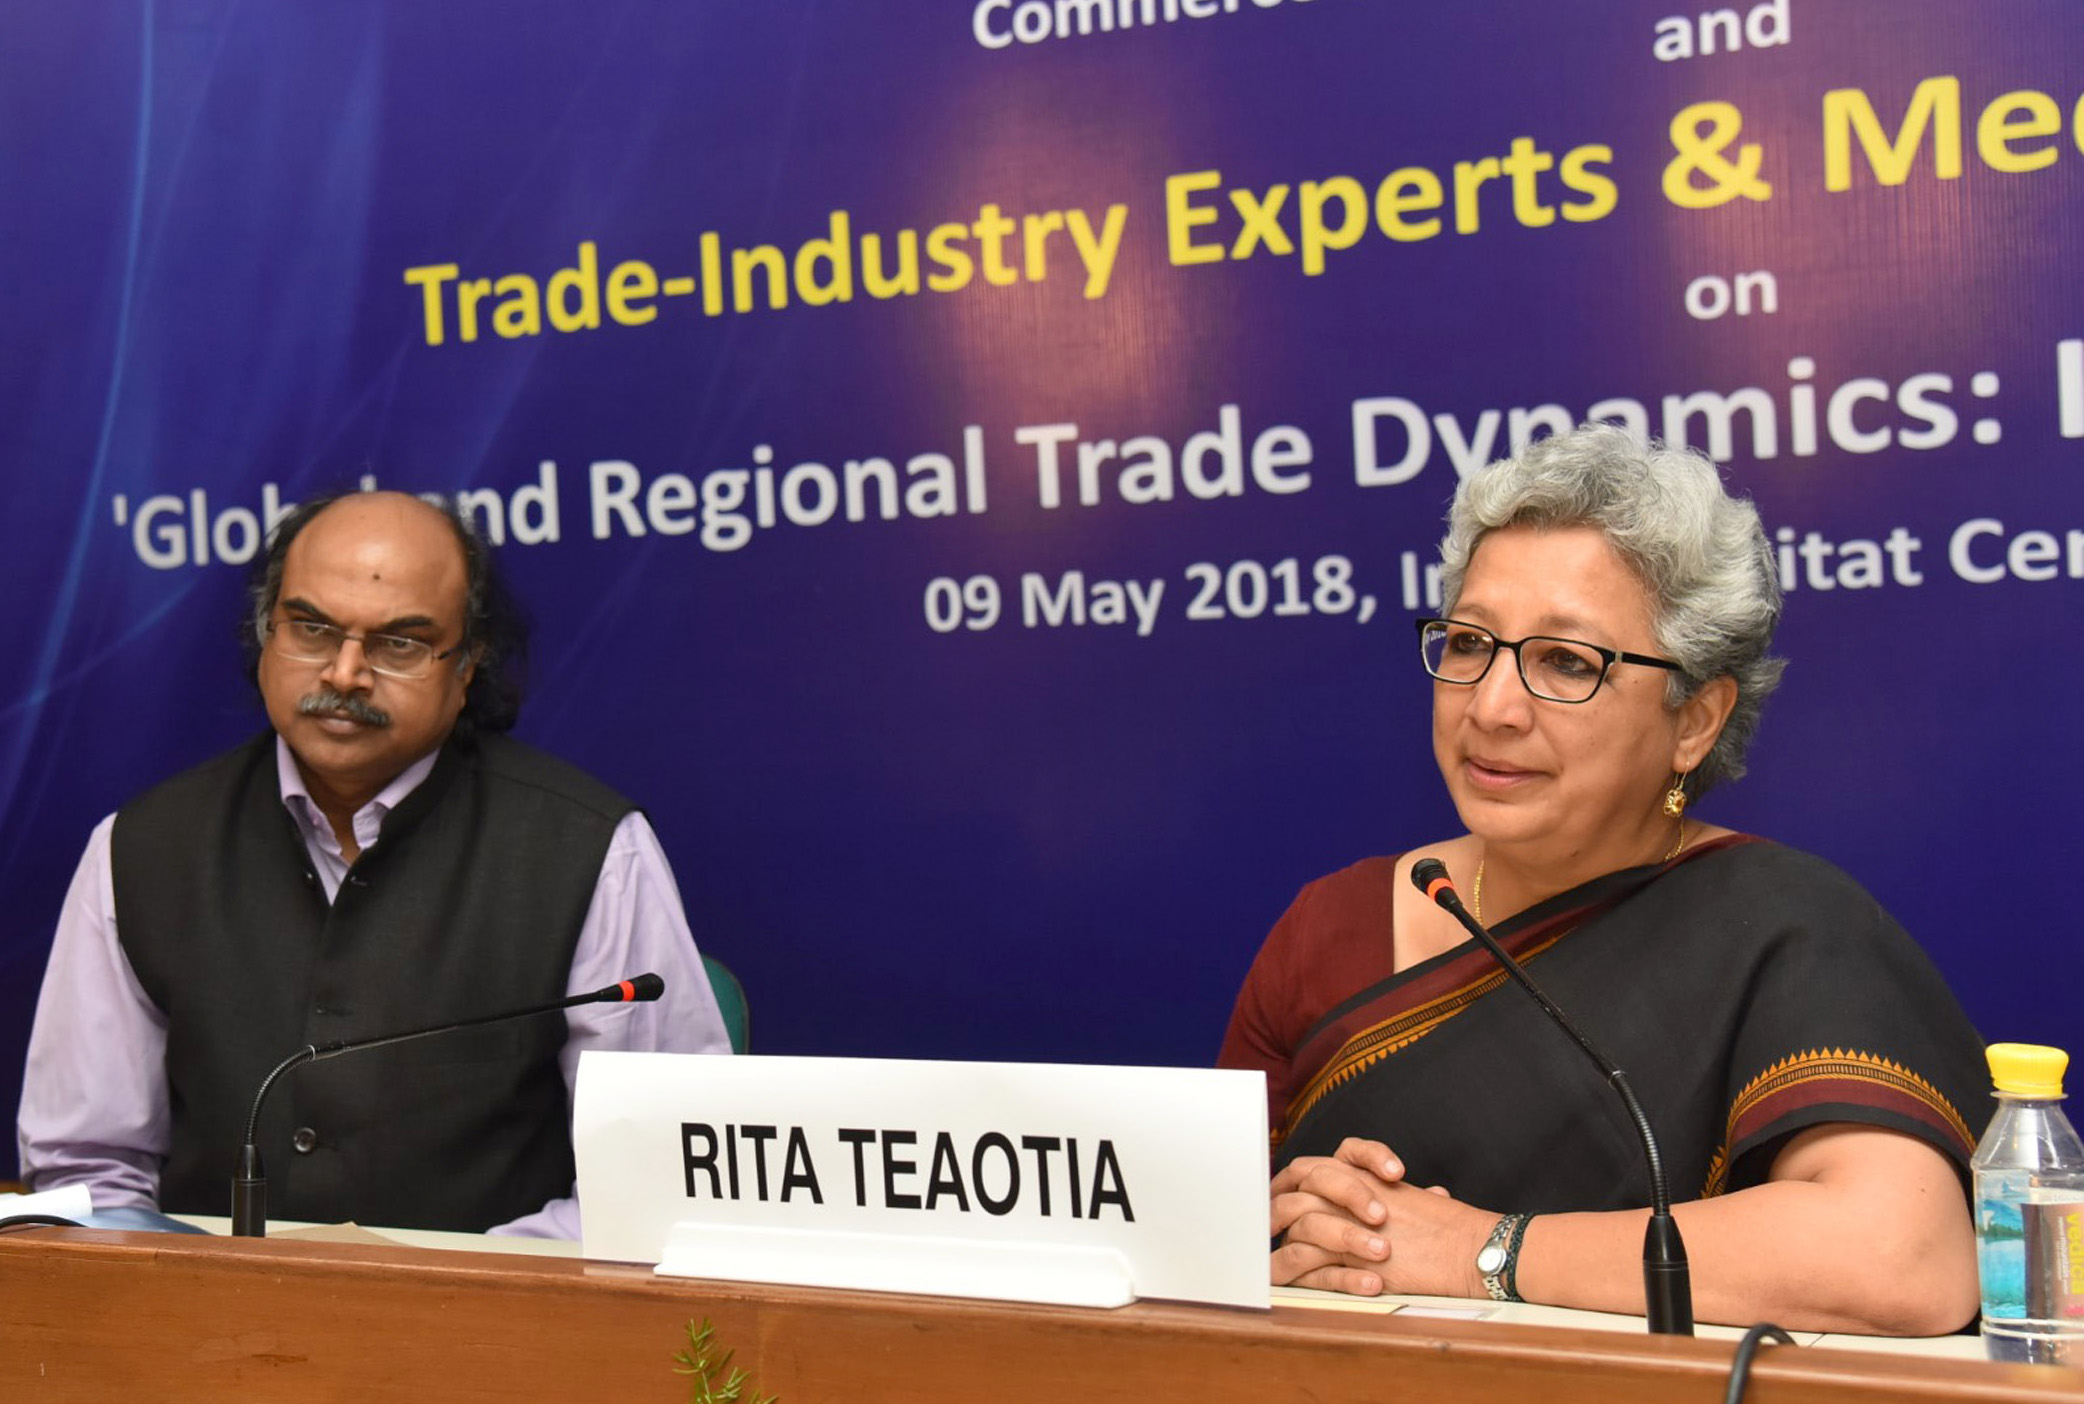 The Commerce Secretary, Ms. Rita A. Teaotia briefing the press at the end of interactive session with Trade-Industry Experts on Global and Regional Trade Dynamics: Indias Future Trade Strategy, organised by the Centre for Regional Trade (CRT), in New Delhi on May 09, 2018.